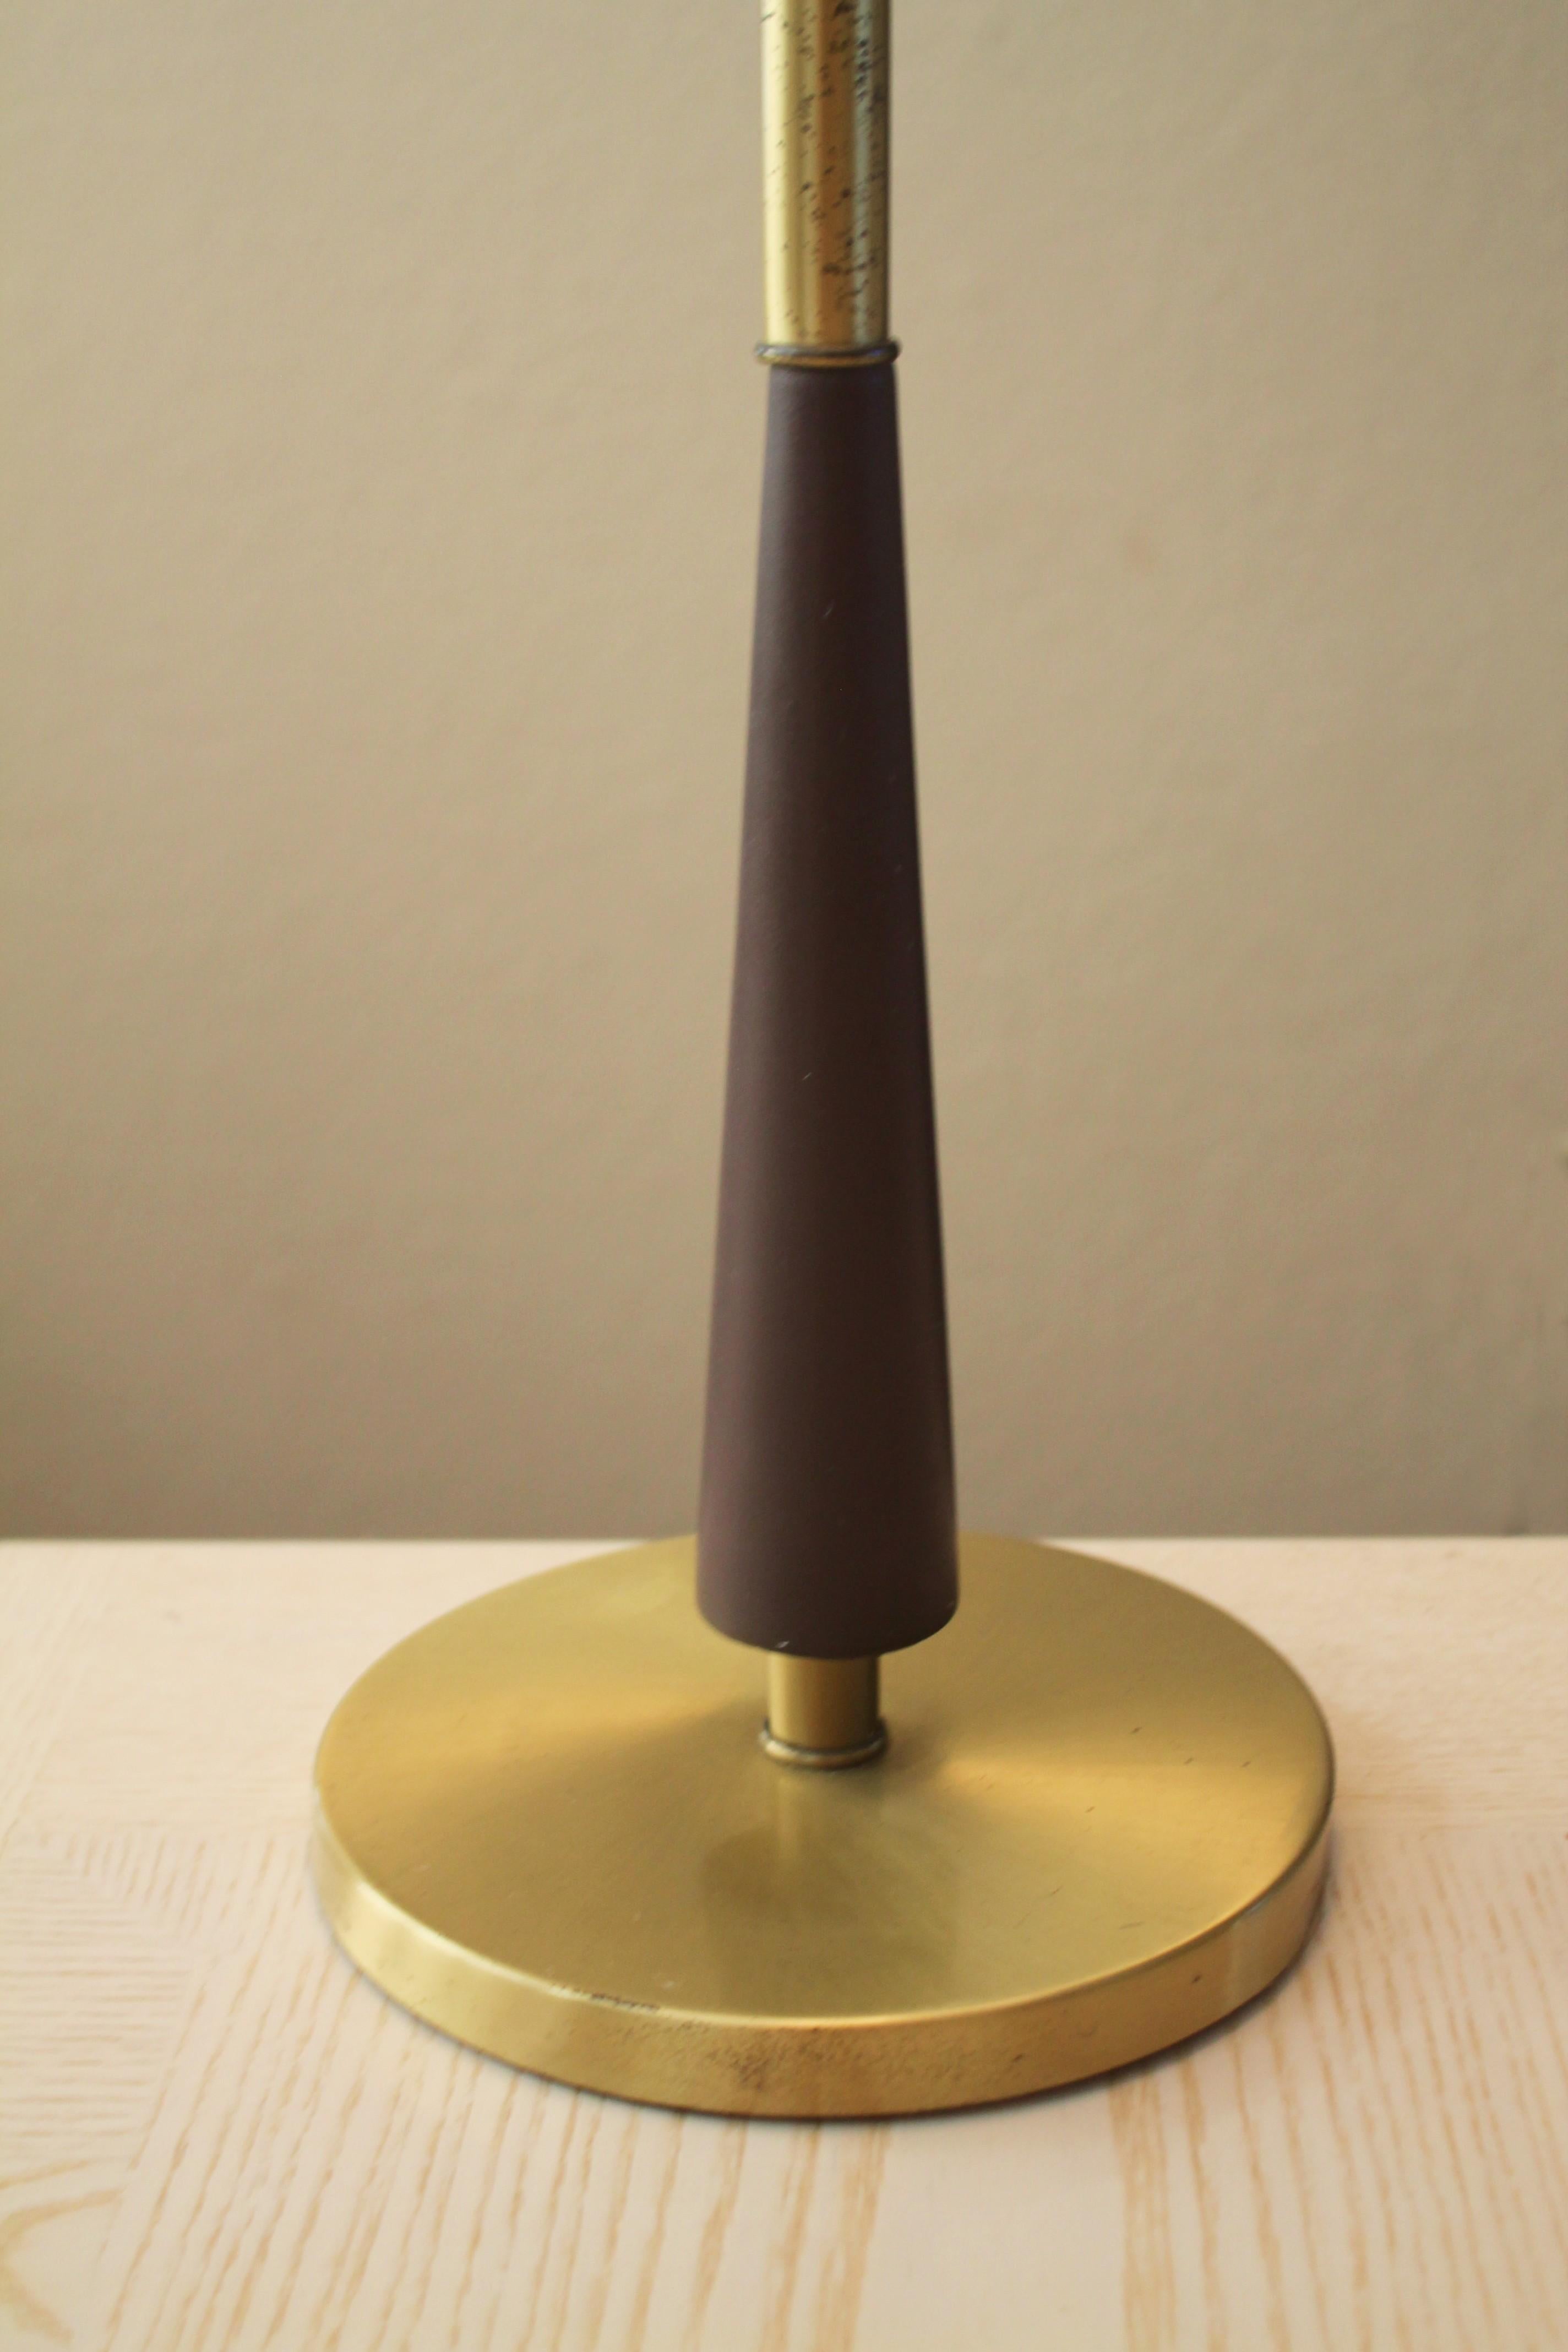 American Rare Rembrandt Mid Century Modern Table Lamp! Atomic Ranch Decor! MCM 1950s For Sale